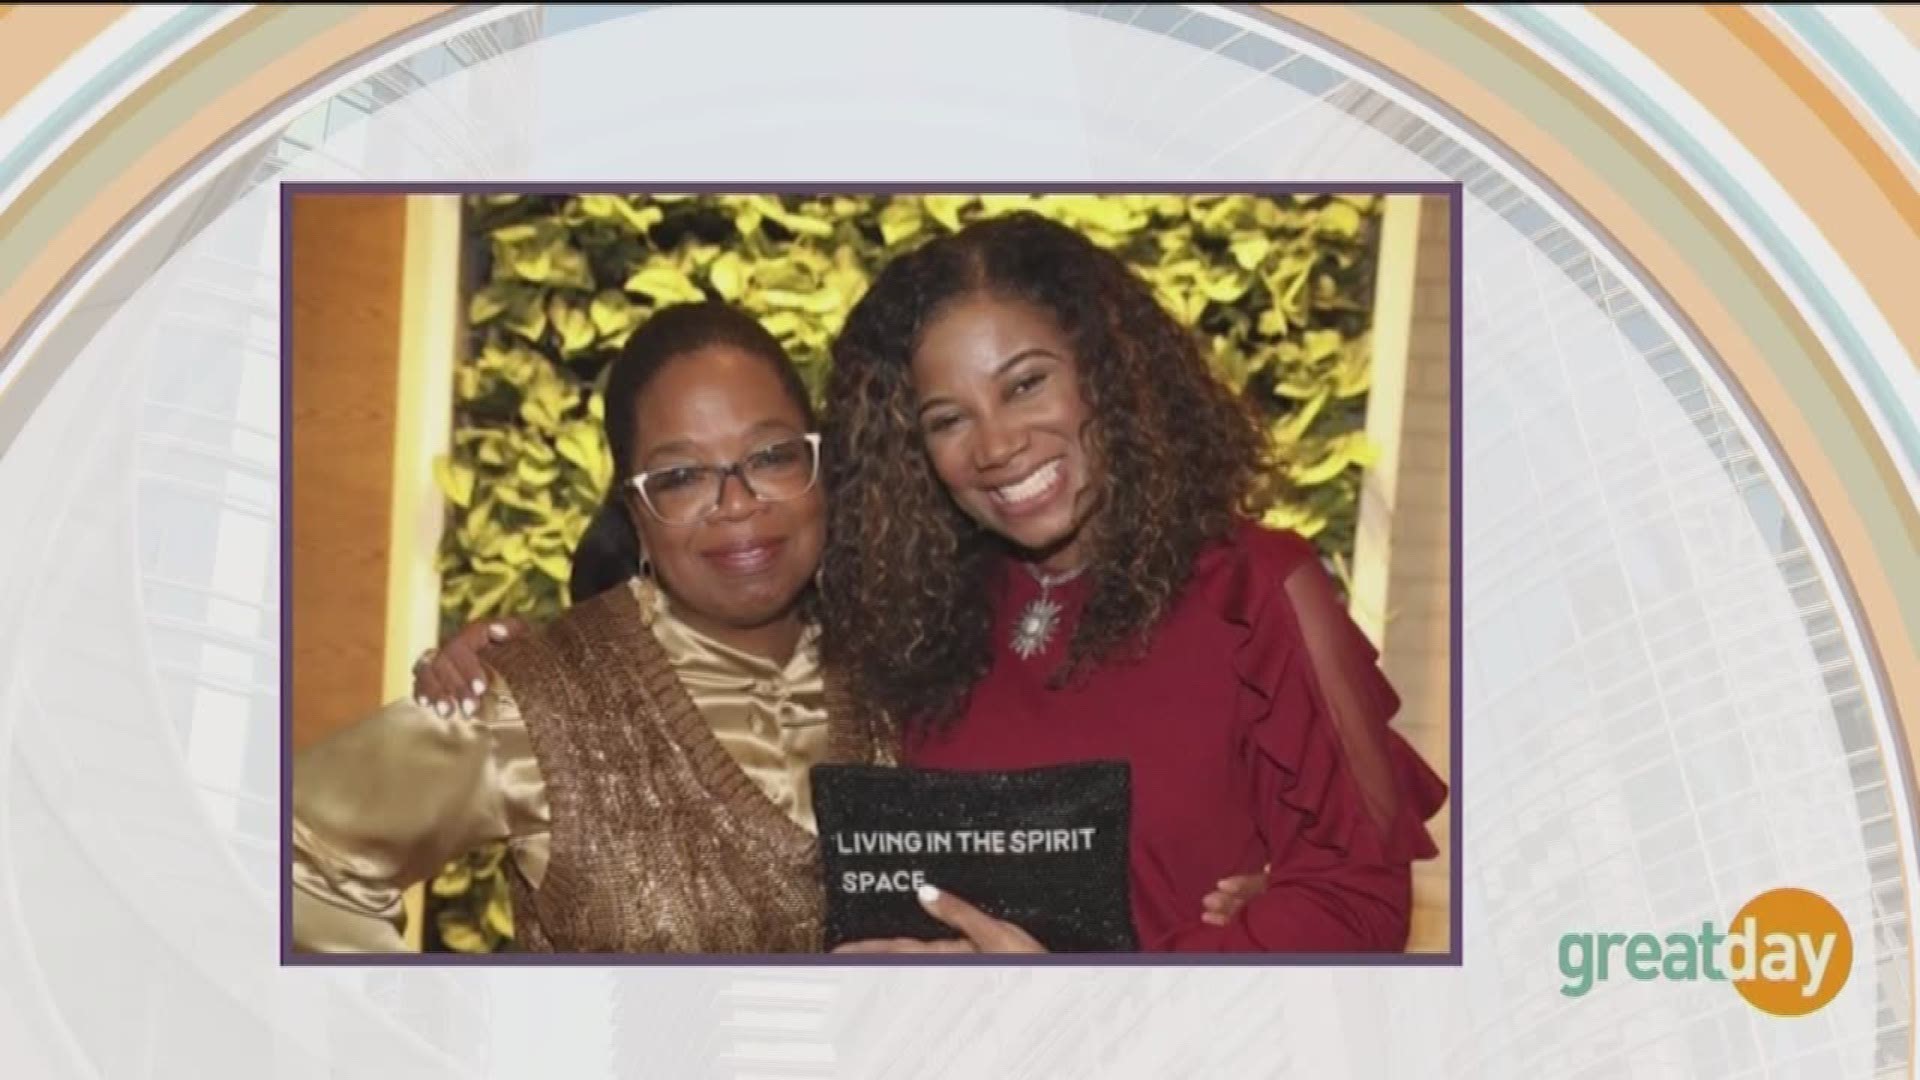 Learn about a nationwide food pantry that caught the attention of Oprah.